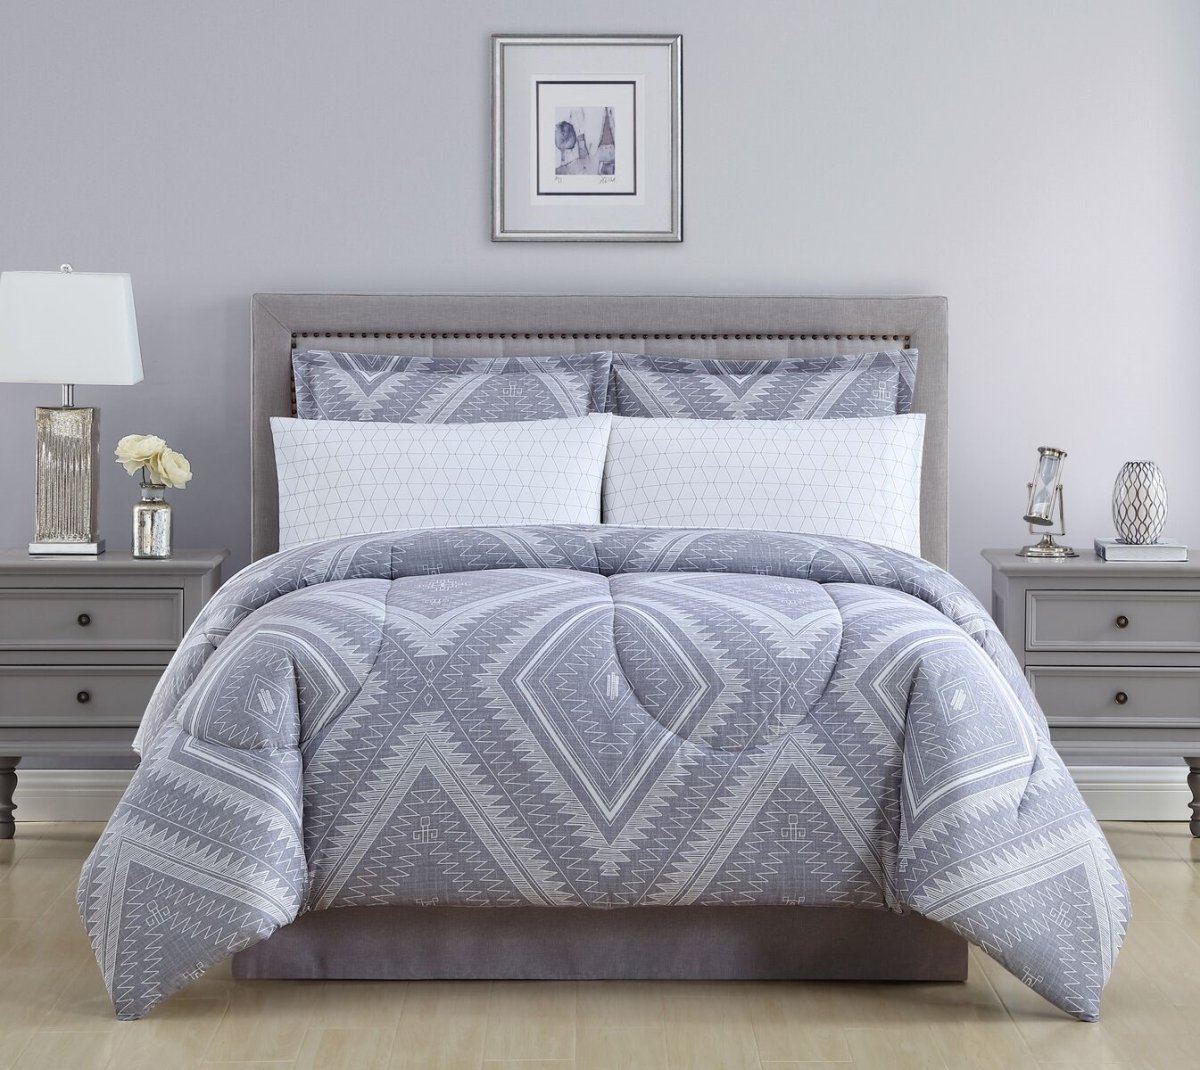 19331804bb-mul Aileen Bed In A Bag Comforter Set, Grey - King Size, 8 Piece